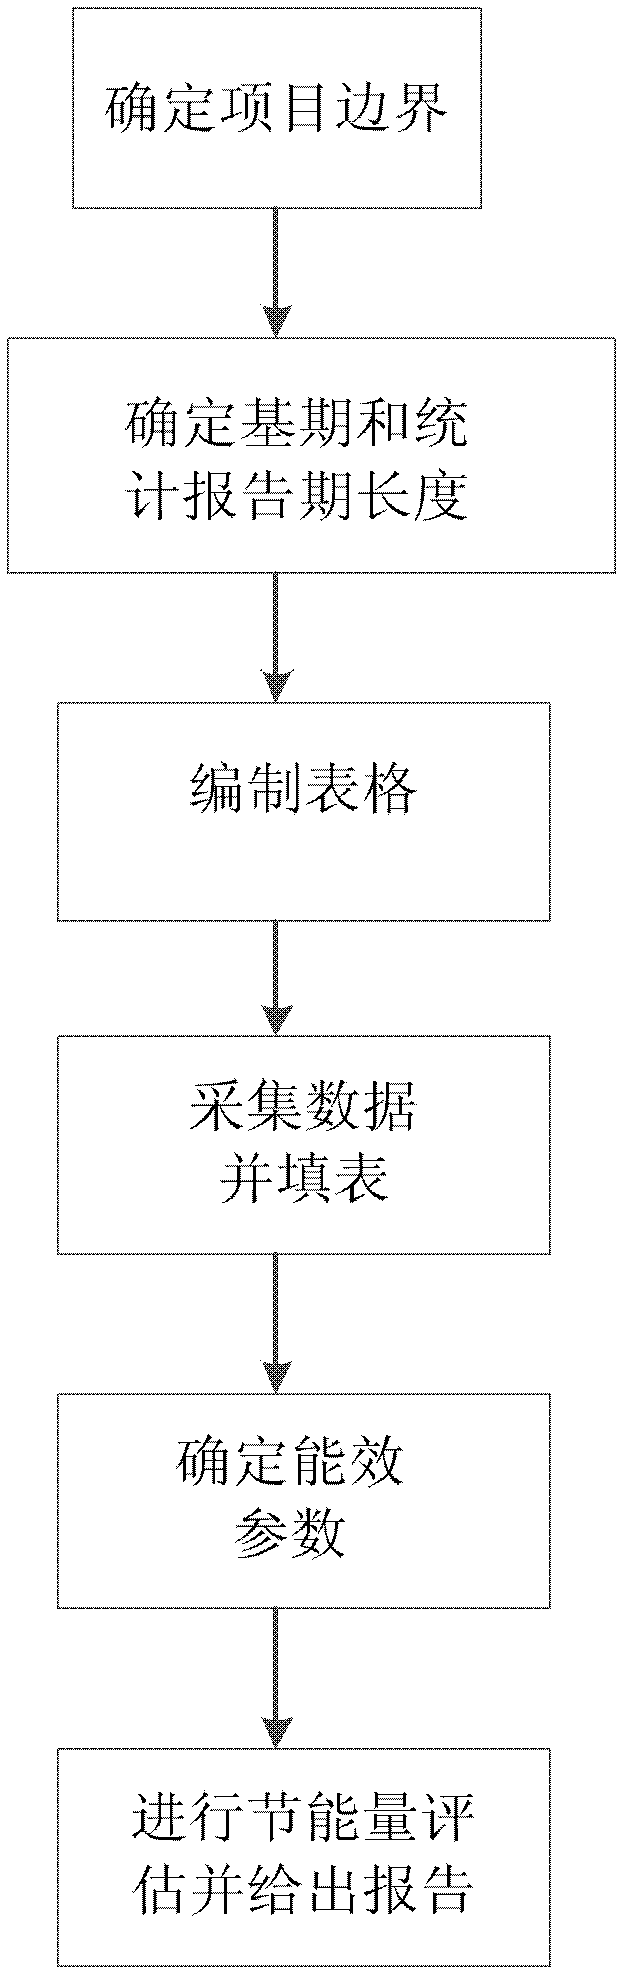 Measuring and verifying method for energy saving amounts of power supply and distribution lines